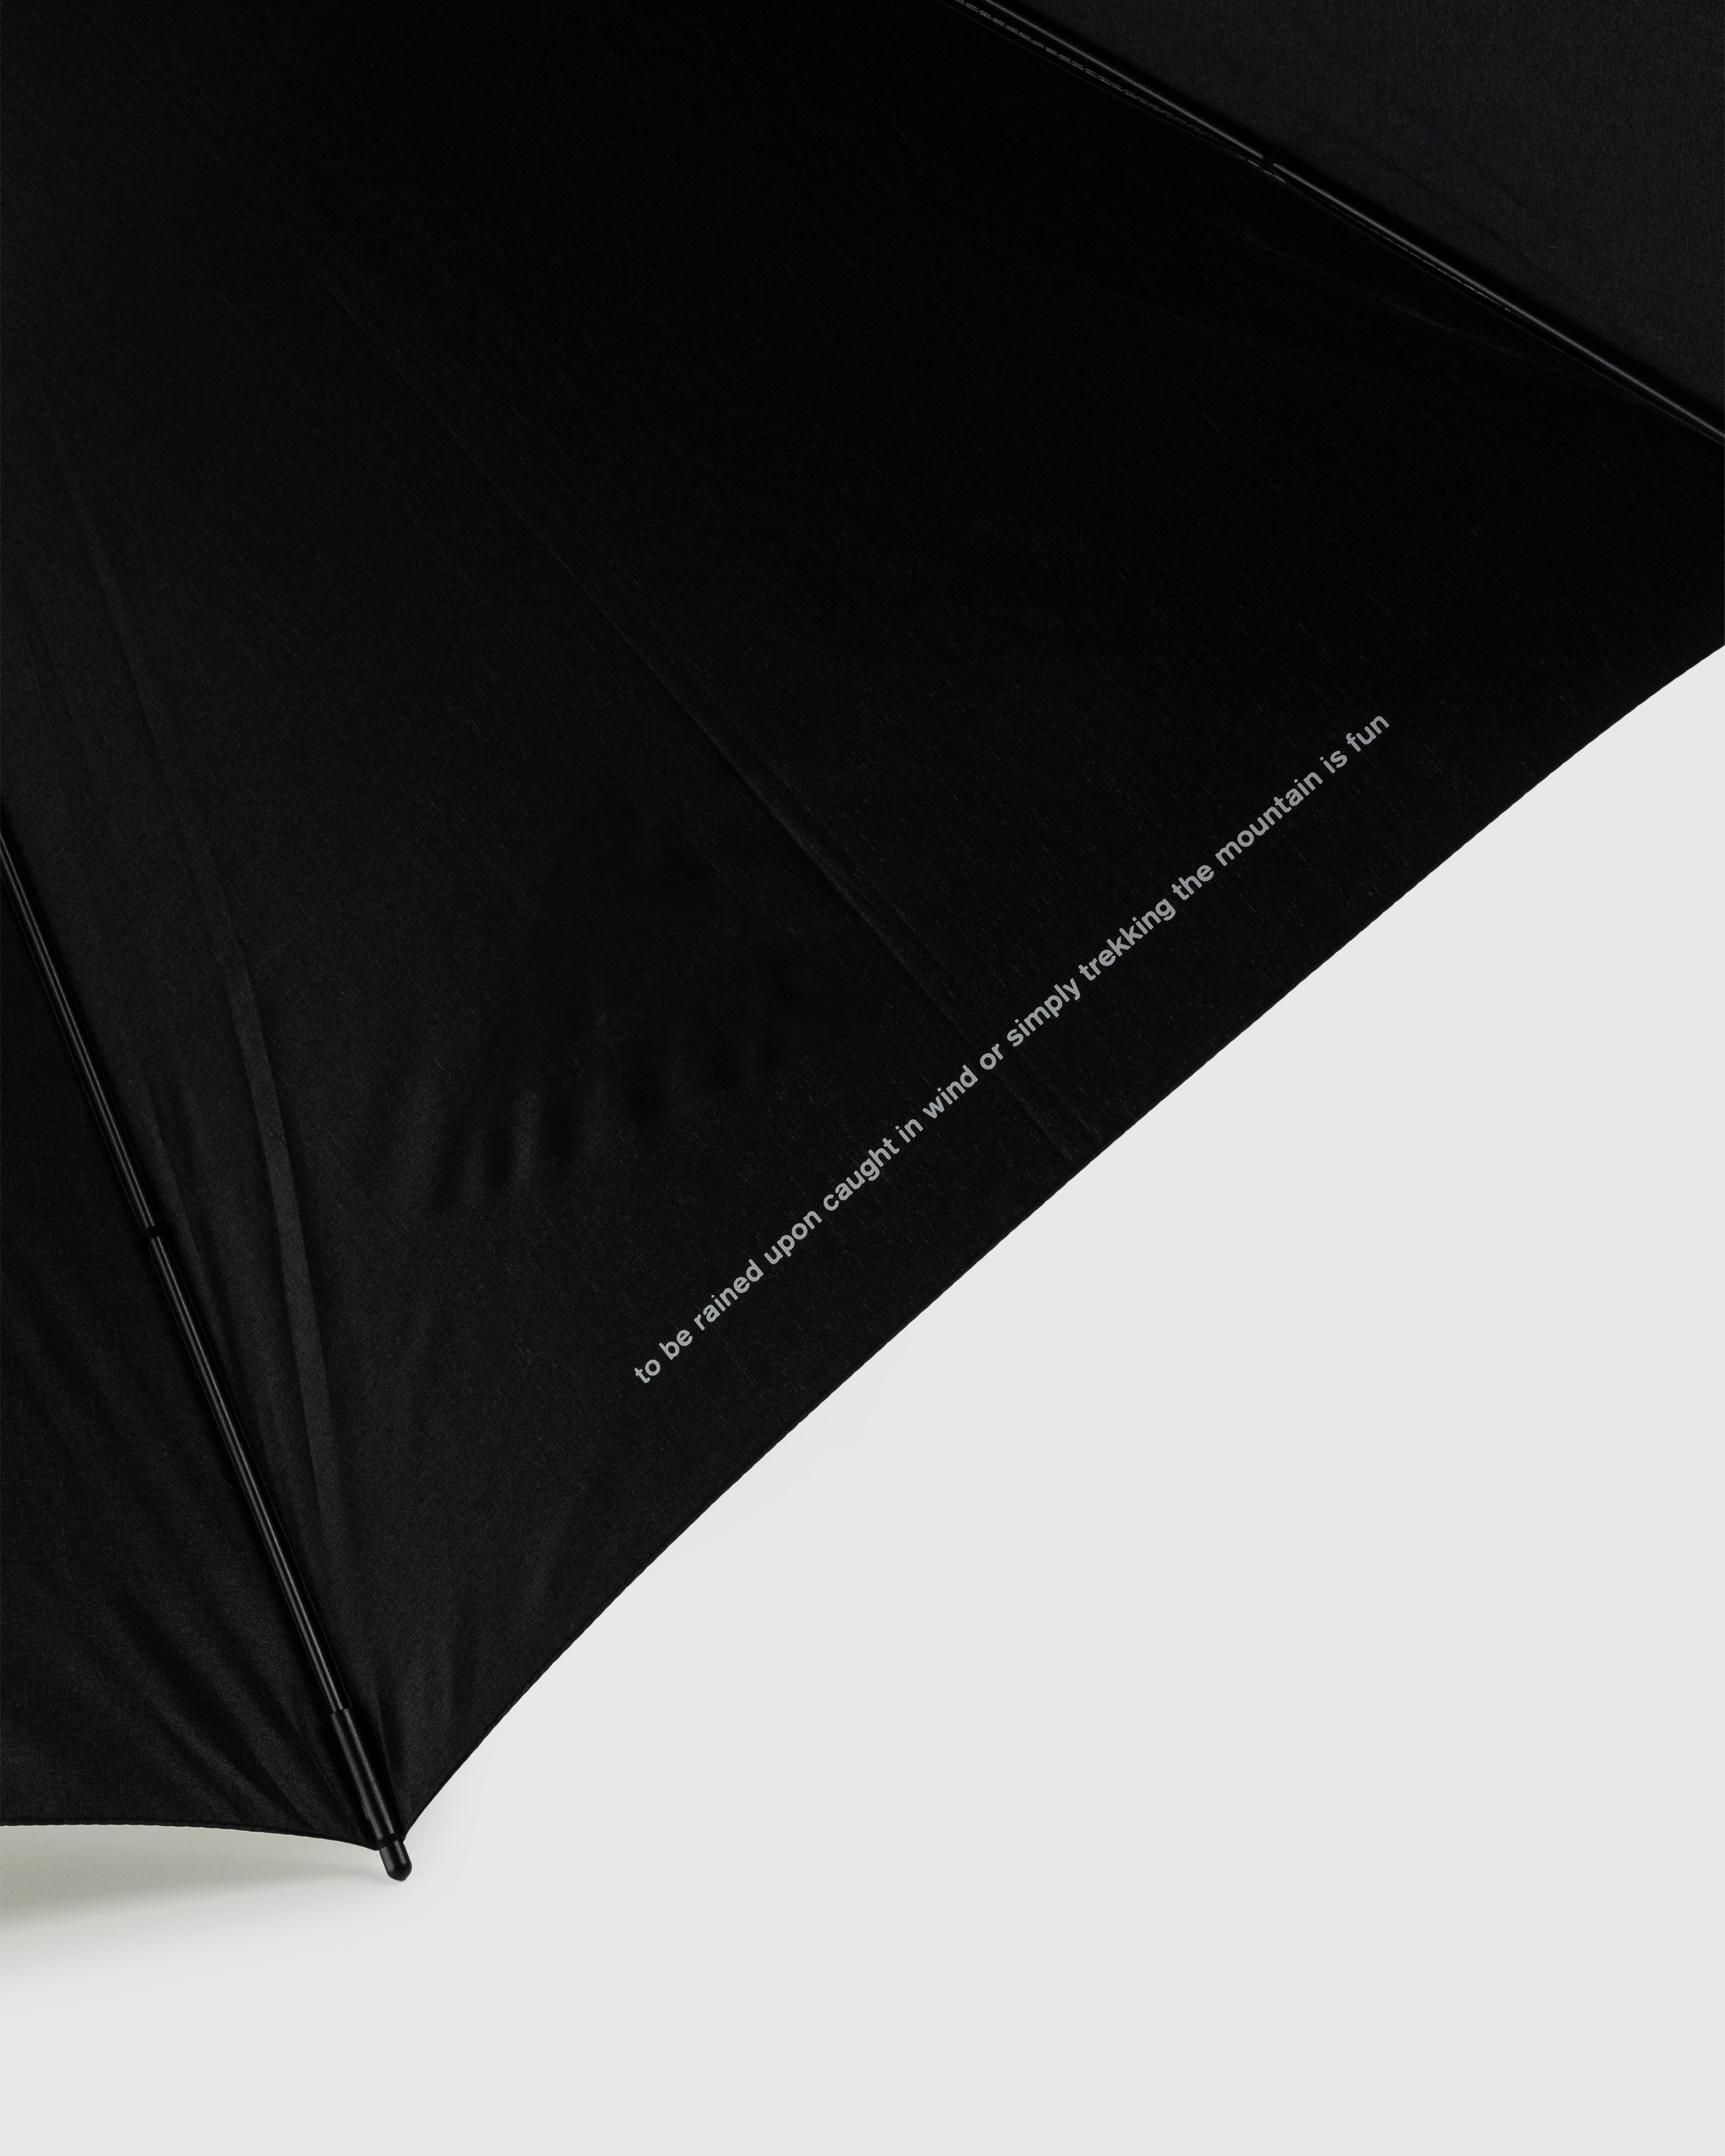 And Wander - Euroschirm Umbrella Silver - Lifestyle - Silver - Image 3